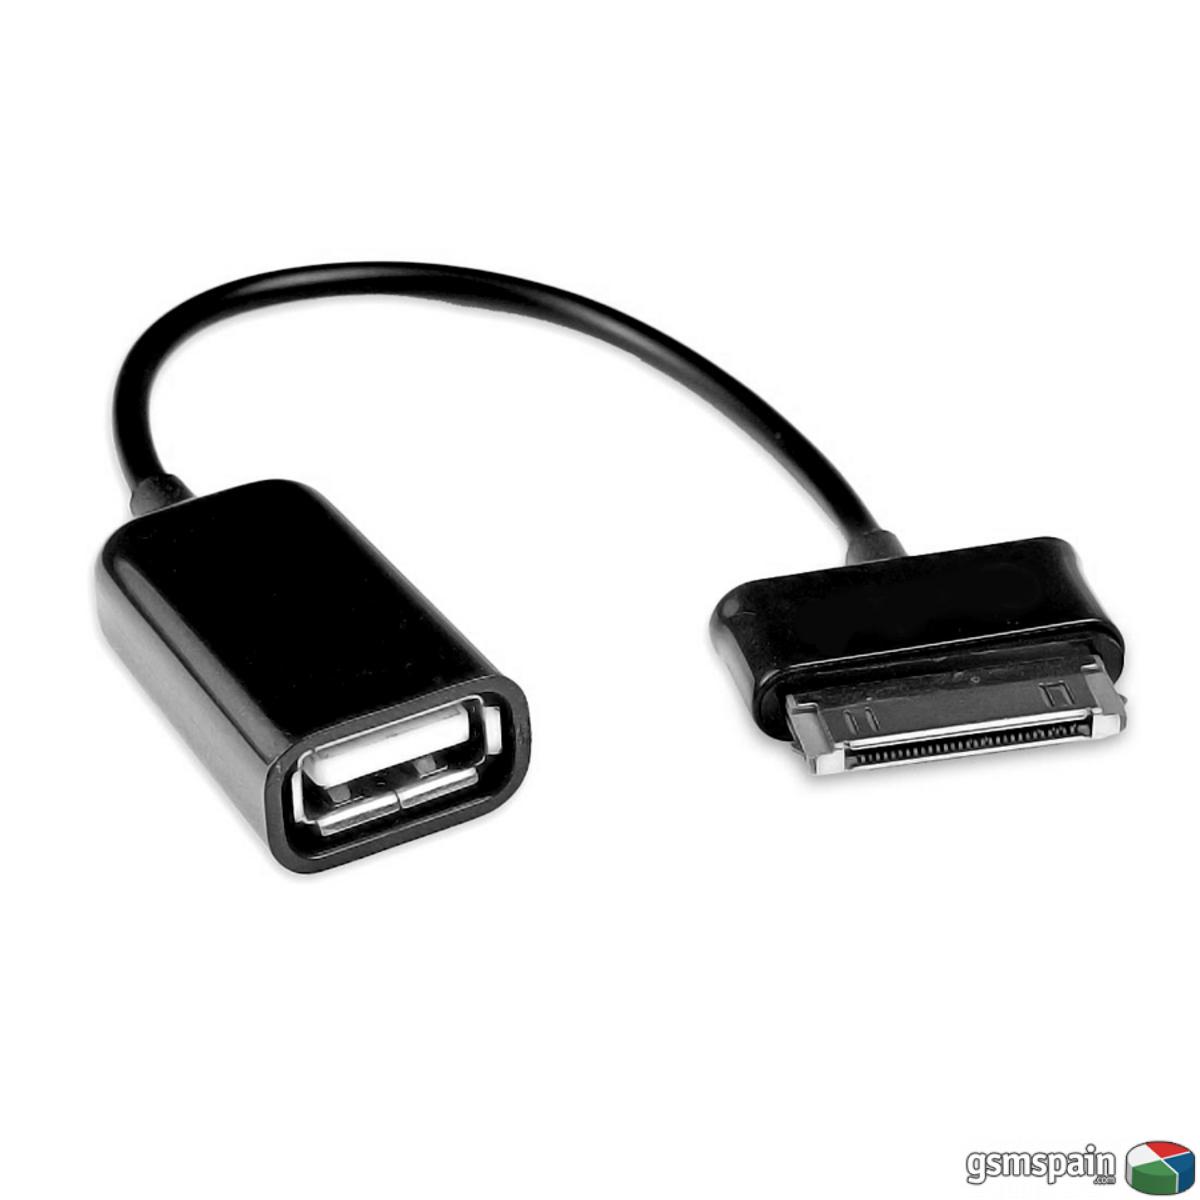 Cable OTG Samsung Galaxy TaB 10.1 Solo 1,90 Zona Outlet Iberacces